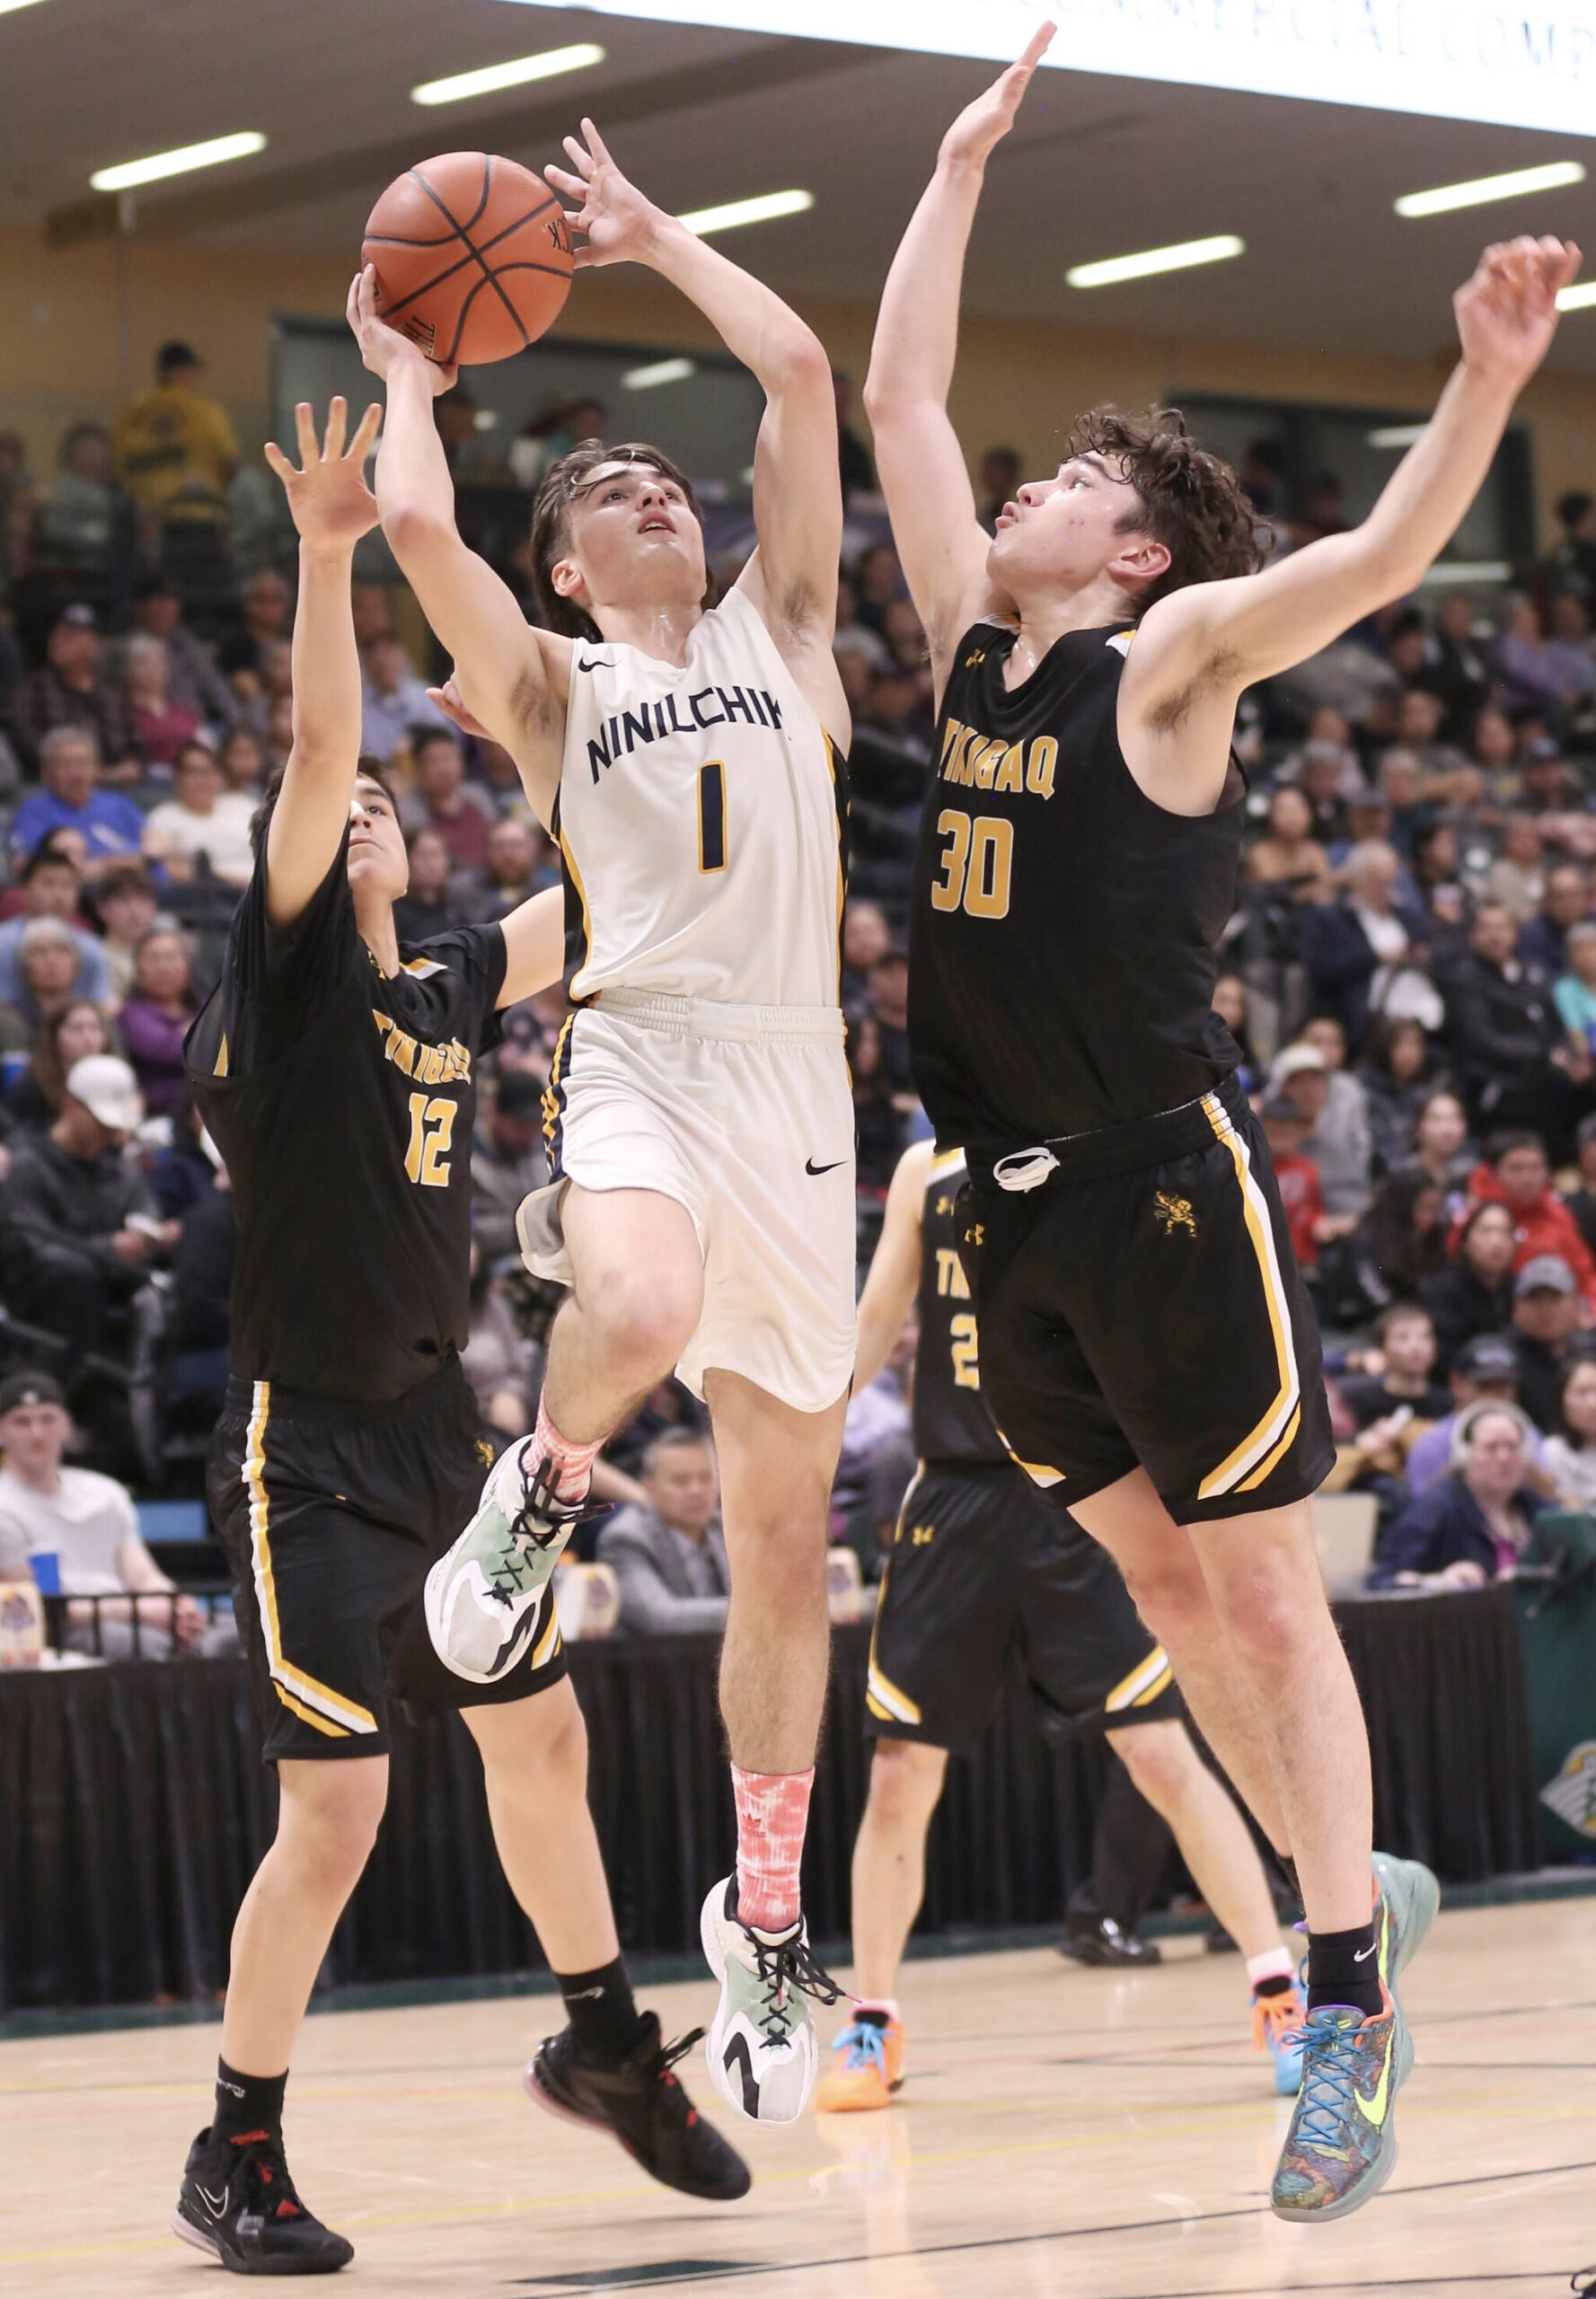 Ninilchik’s Rowan Mahoney goes up for a shot against Tikigaq’s Micah Kinneeveauk and Aqquilluk Hank in the Class 2A boys state championship Saturday, March 18, 2023, at the Alaska Airlines Center in Anchorage, Alaska. (Photo courtesy of Robin Moore)